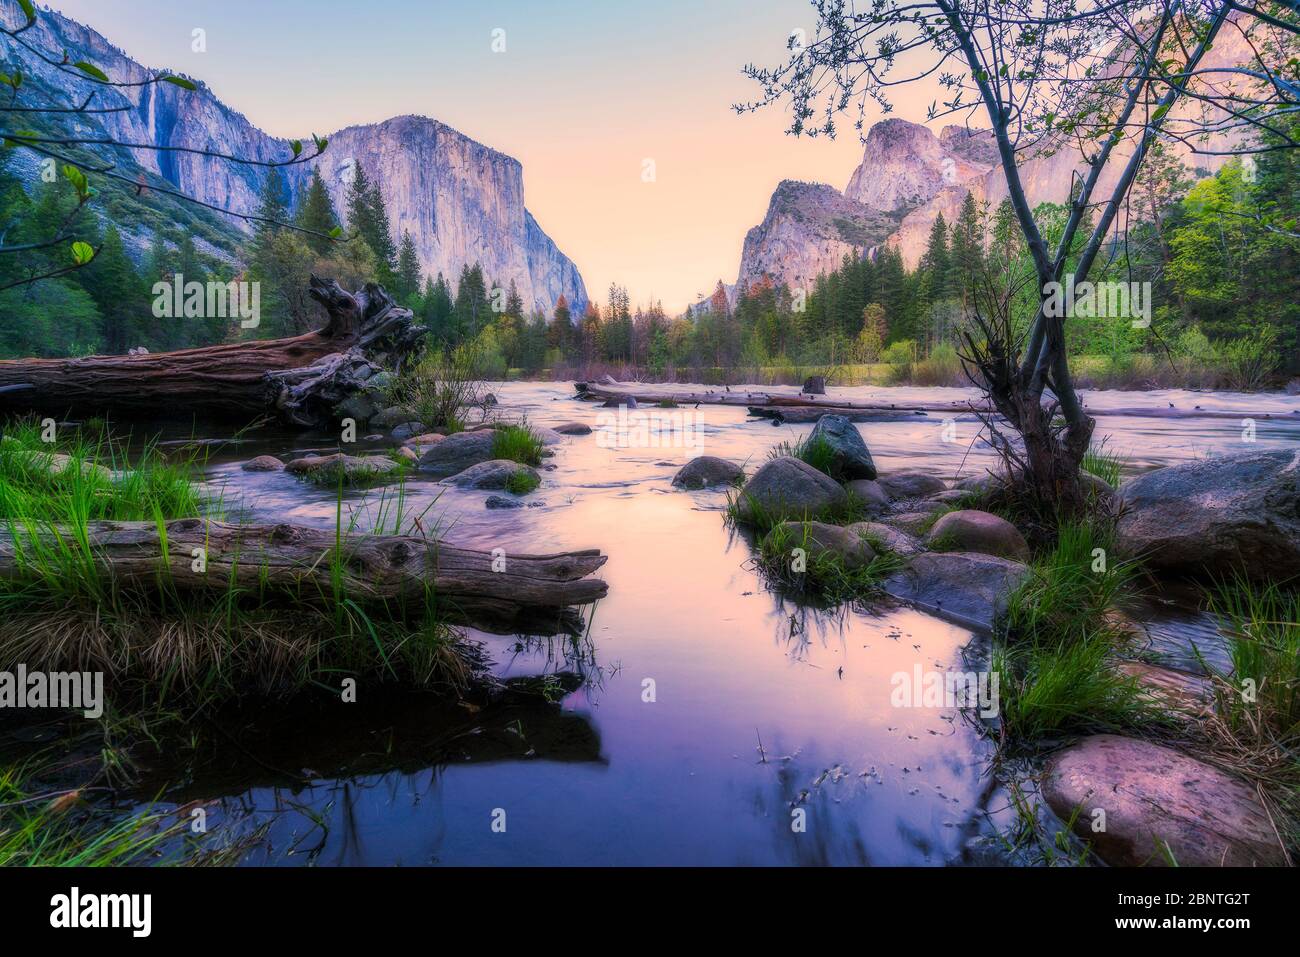 scenic view of El Capital and Cathedral cliff with river foreground,shoot in the morning in spring season,Yosemite National park,California,usa. Stock Photo